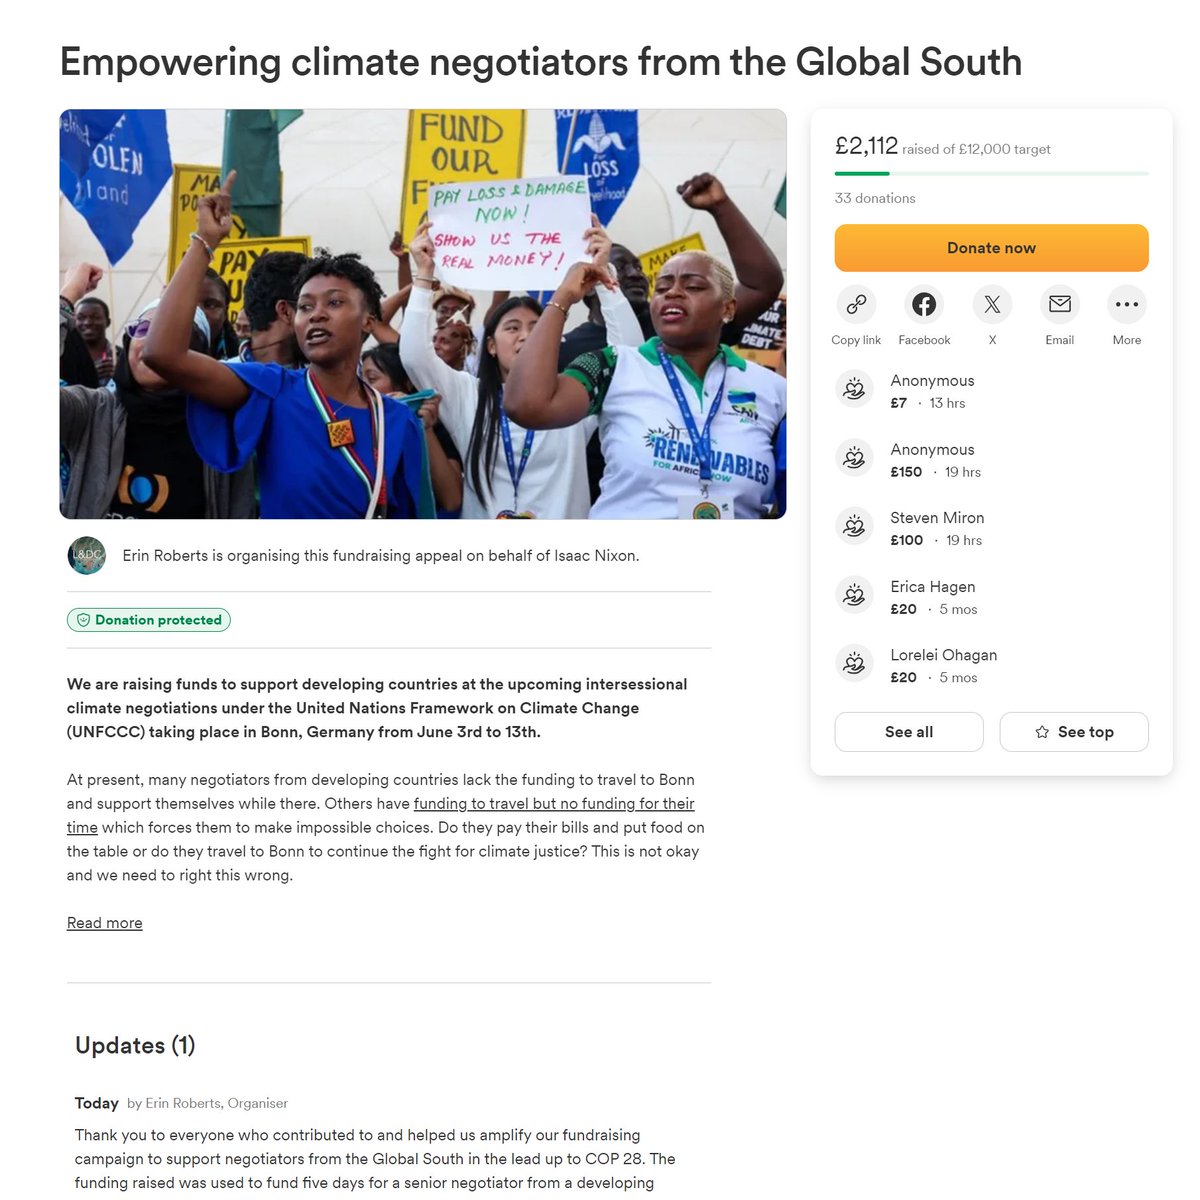 1/6.📢FUNDRAISER: Some of the #LossAndDamage negotiators from the #GlobalSouth who worked tirelessly to ensure the #LossAndDamage Fund was set up at #COP28 do not have funding to attend the @UNFCCC #BonnClimateConference in June. 🤯

🙏Lets get them there: gofundme.com/f/amplifying-v…